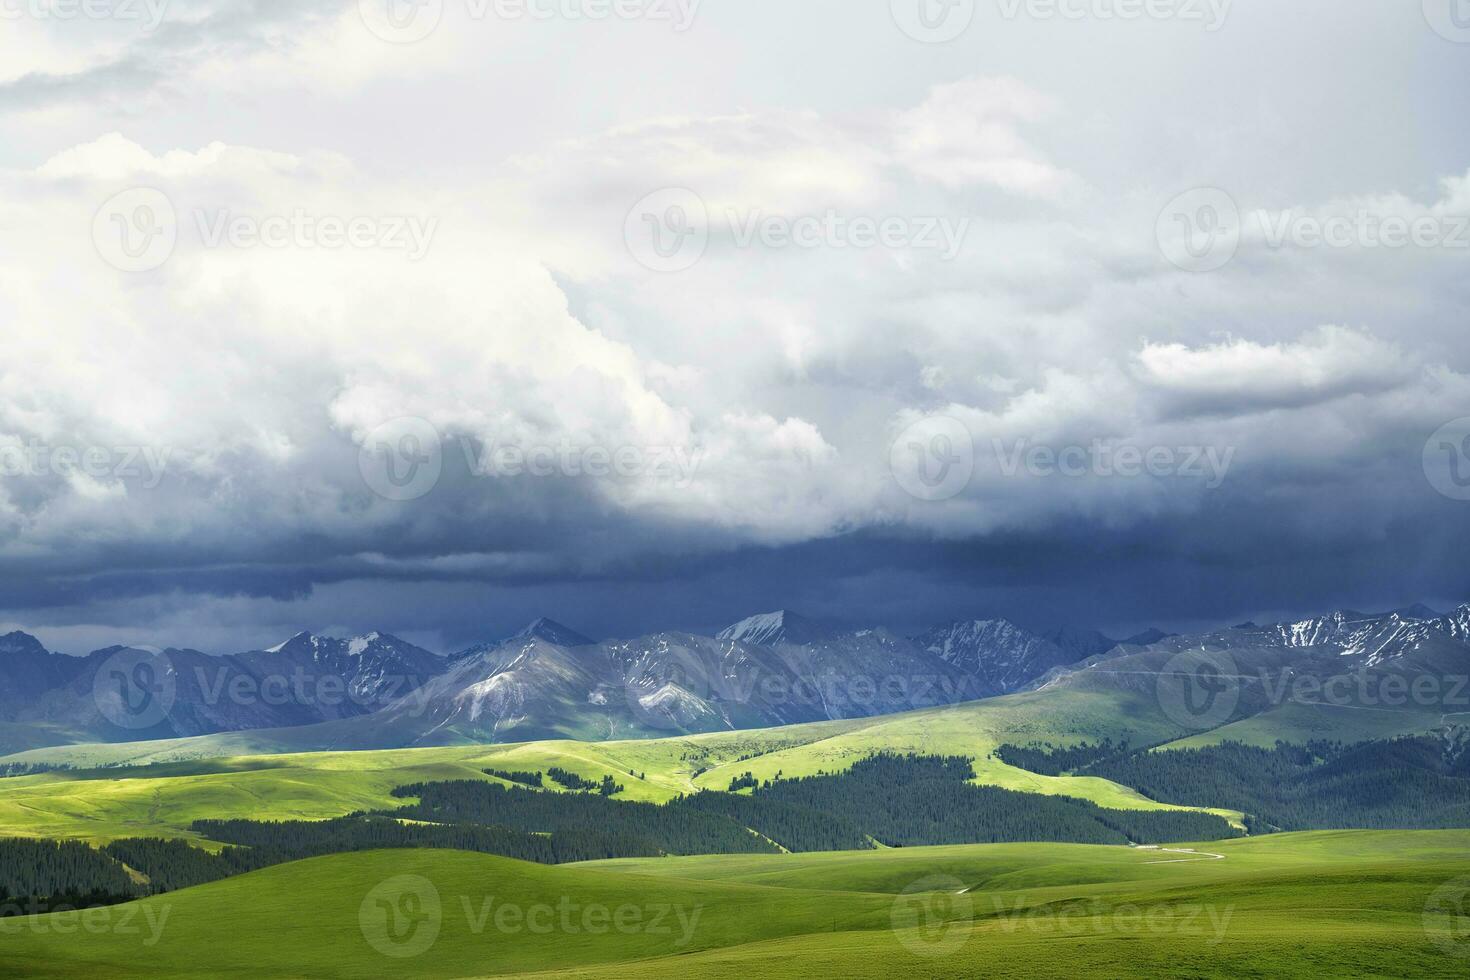 Grassland and mountains in a cloudy day. Photo in Kalajun grassland in Xinjiang, China.